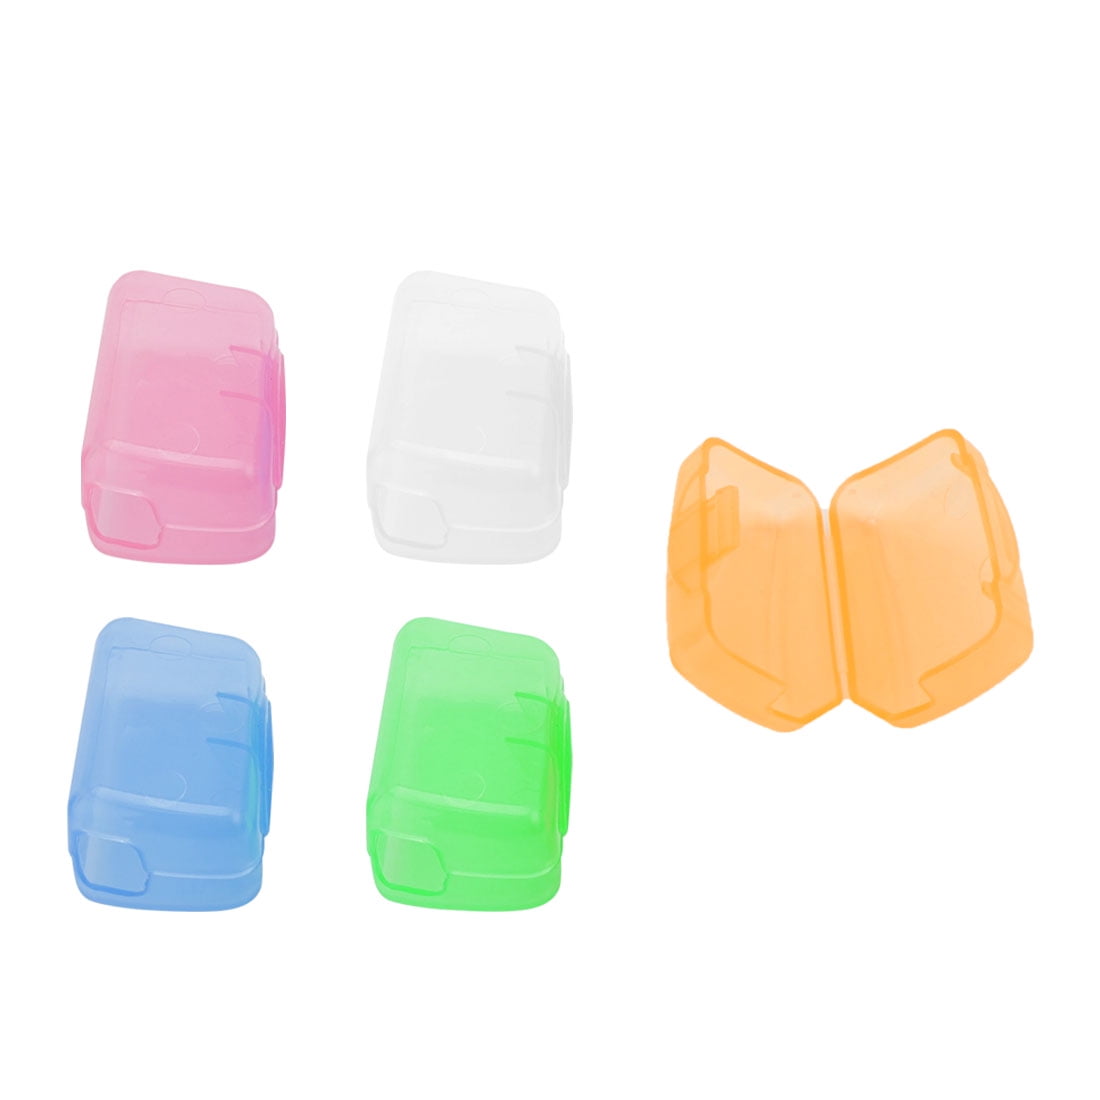 Details about   5x Portable Travel Camping Case Protect Brush Cap Toothbrush Head Cover Holder 